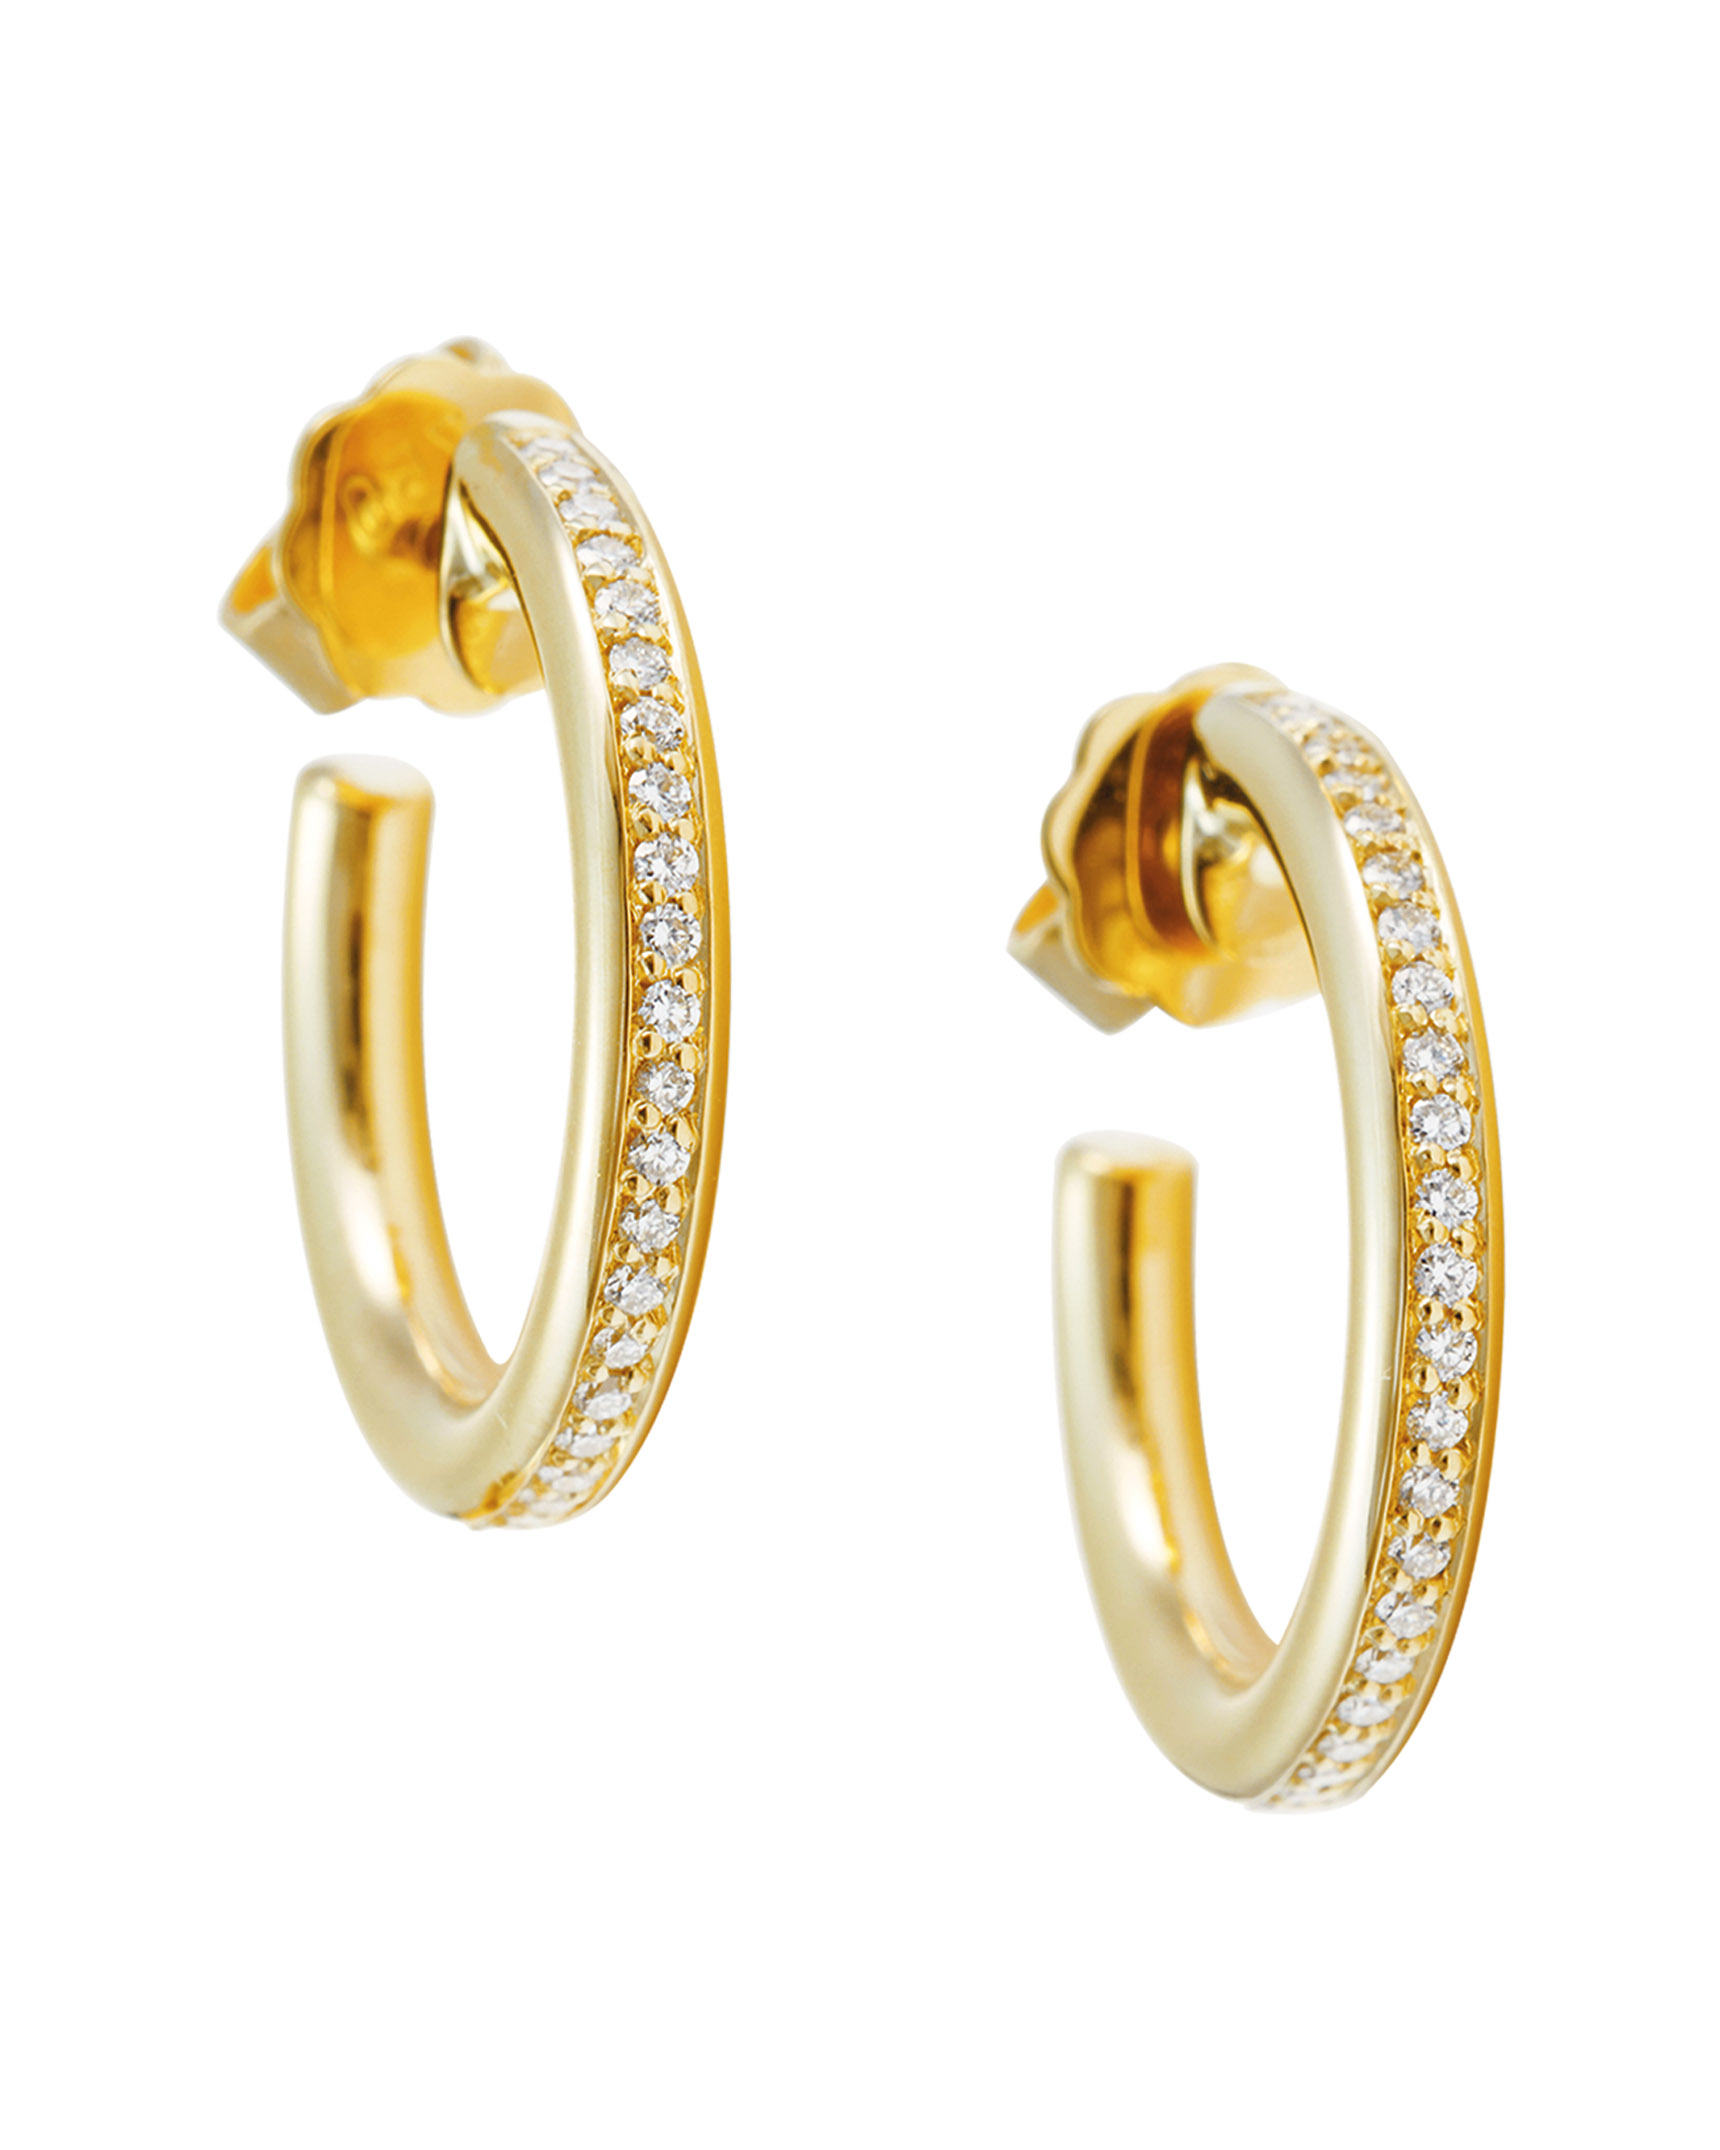 1-Row Diamond and Yellow Gold Hoop Earrings by Henrich & Denzel ...